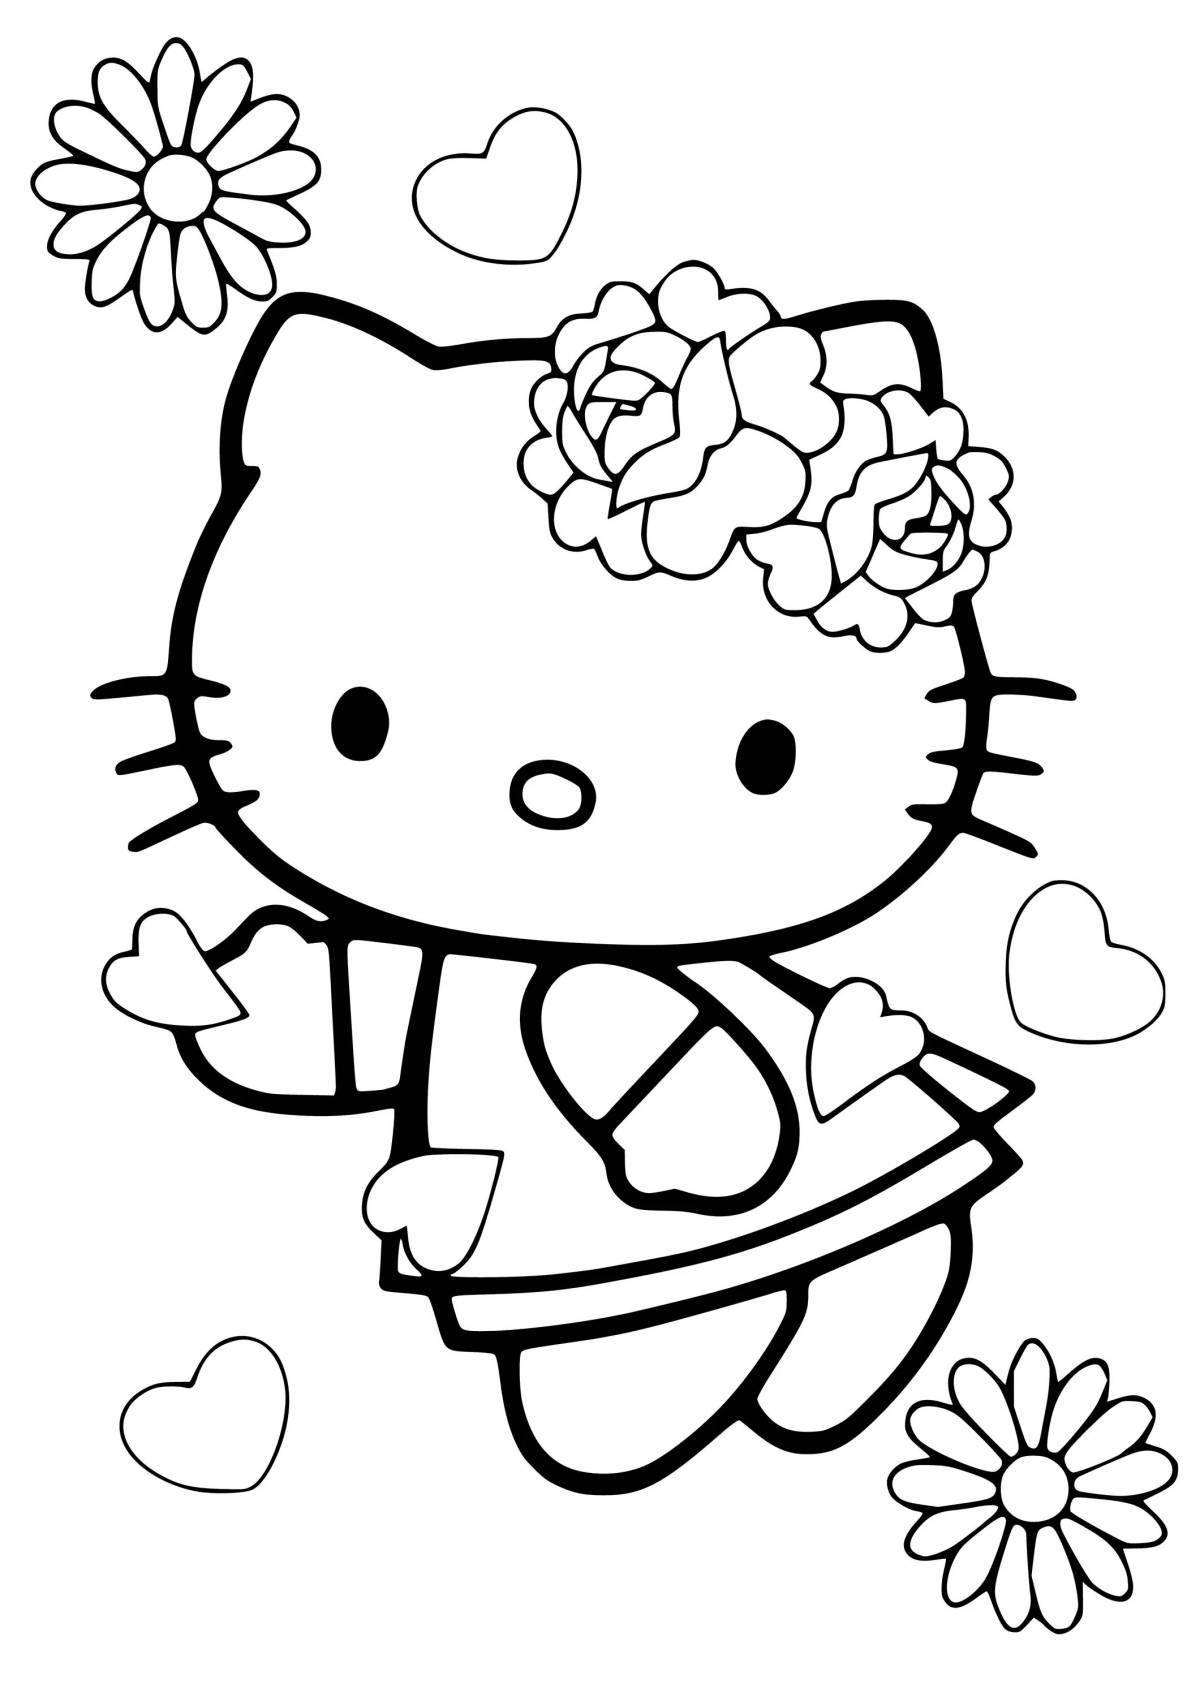 Coloring by numbers hello kitty